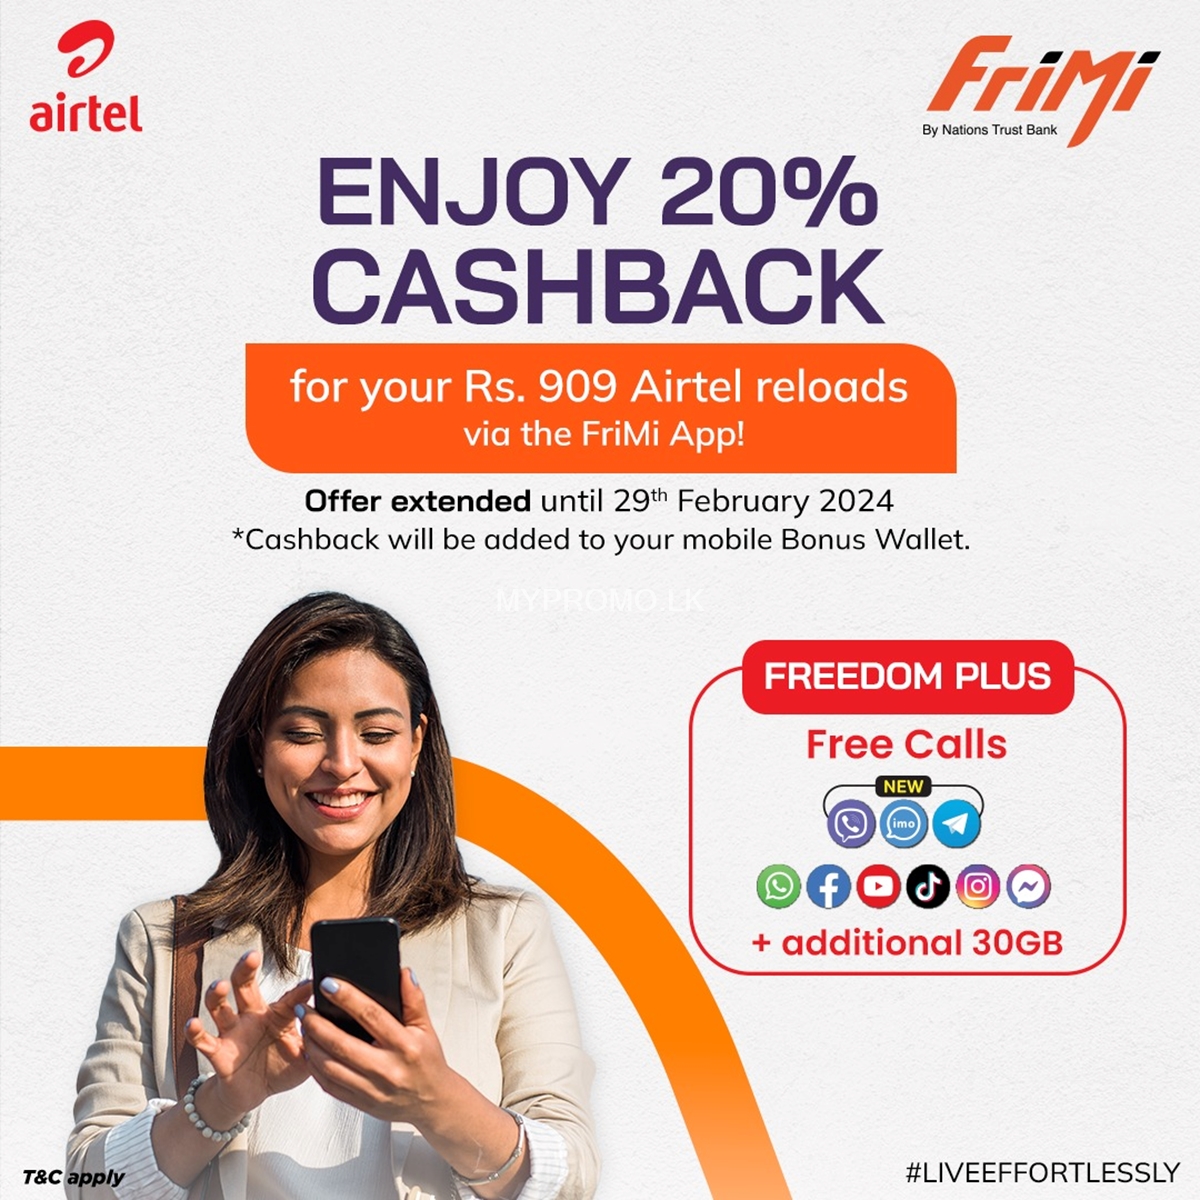 Get 20% CASHBACK for all the Rs.909 Airtel Reloads you make through the FriMi App